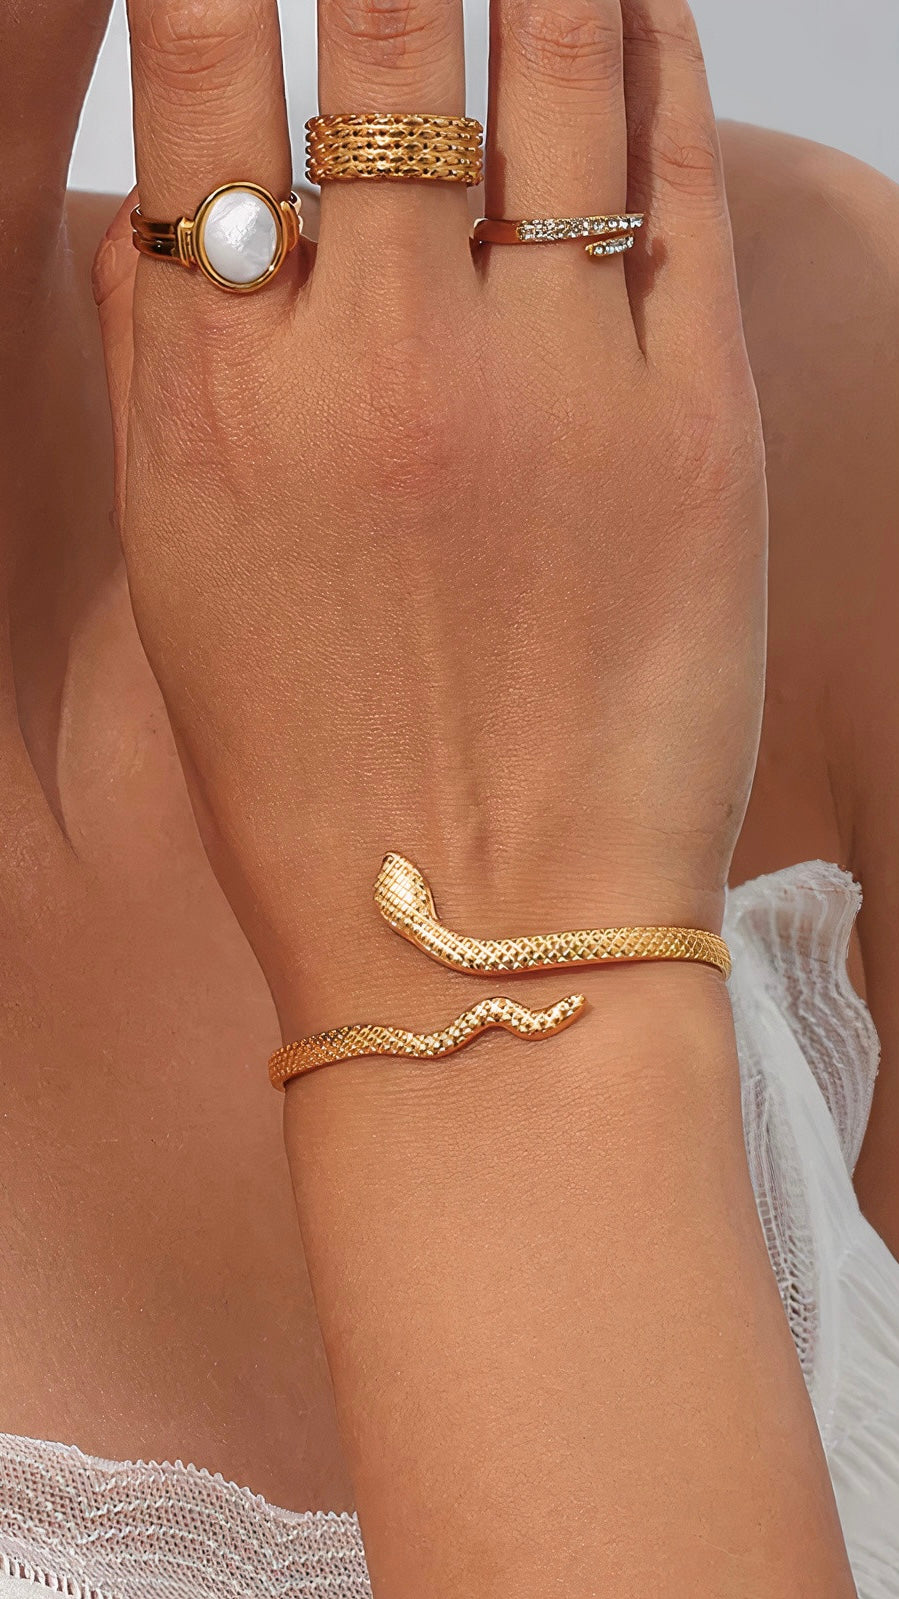 Complete Your Look with Minimalistic but Gorgeous Bracelets